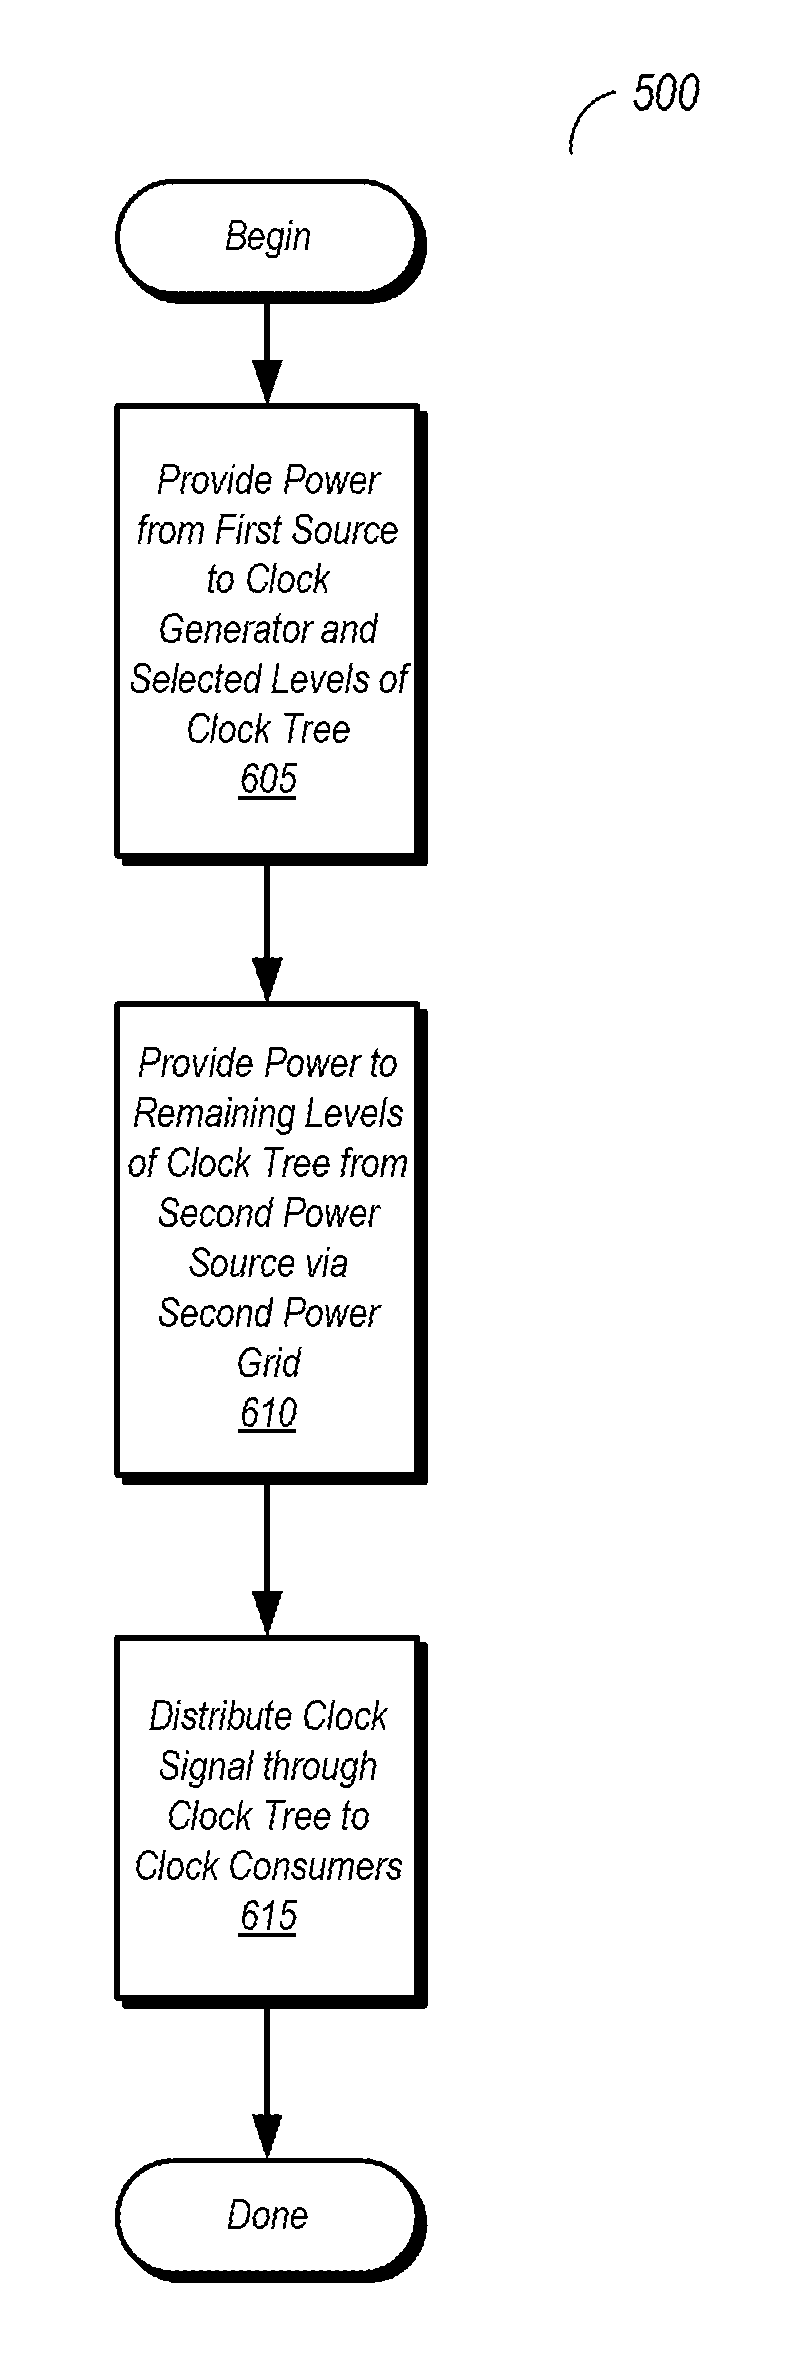 Power source for clock distribution network